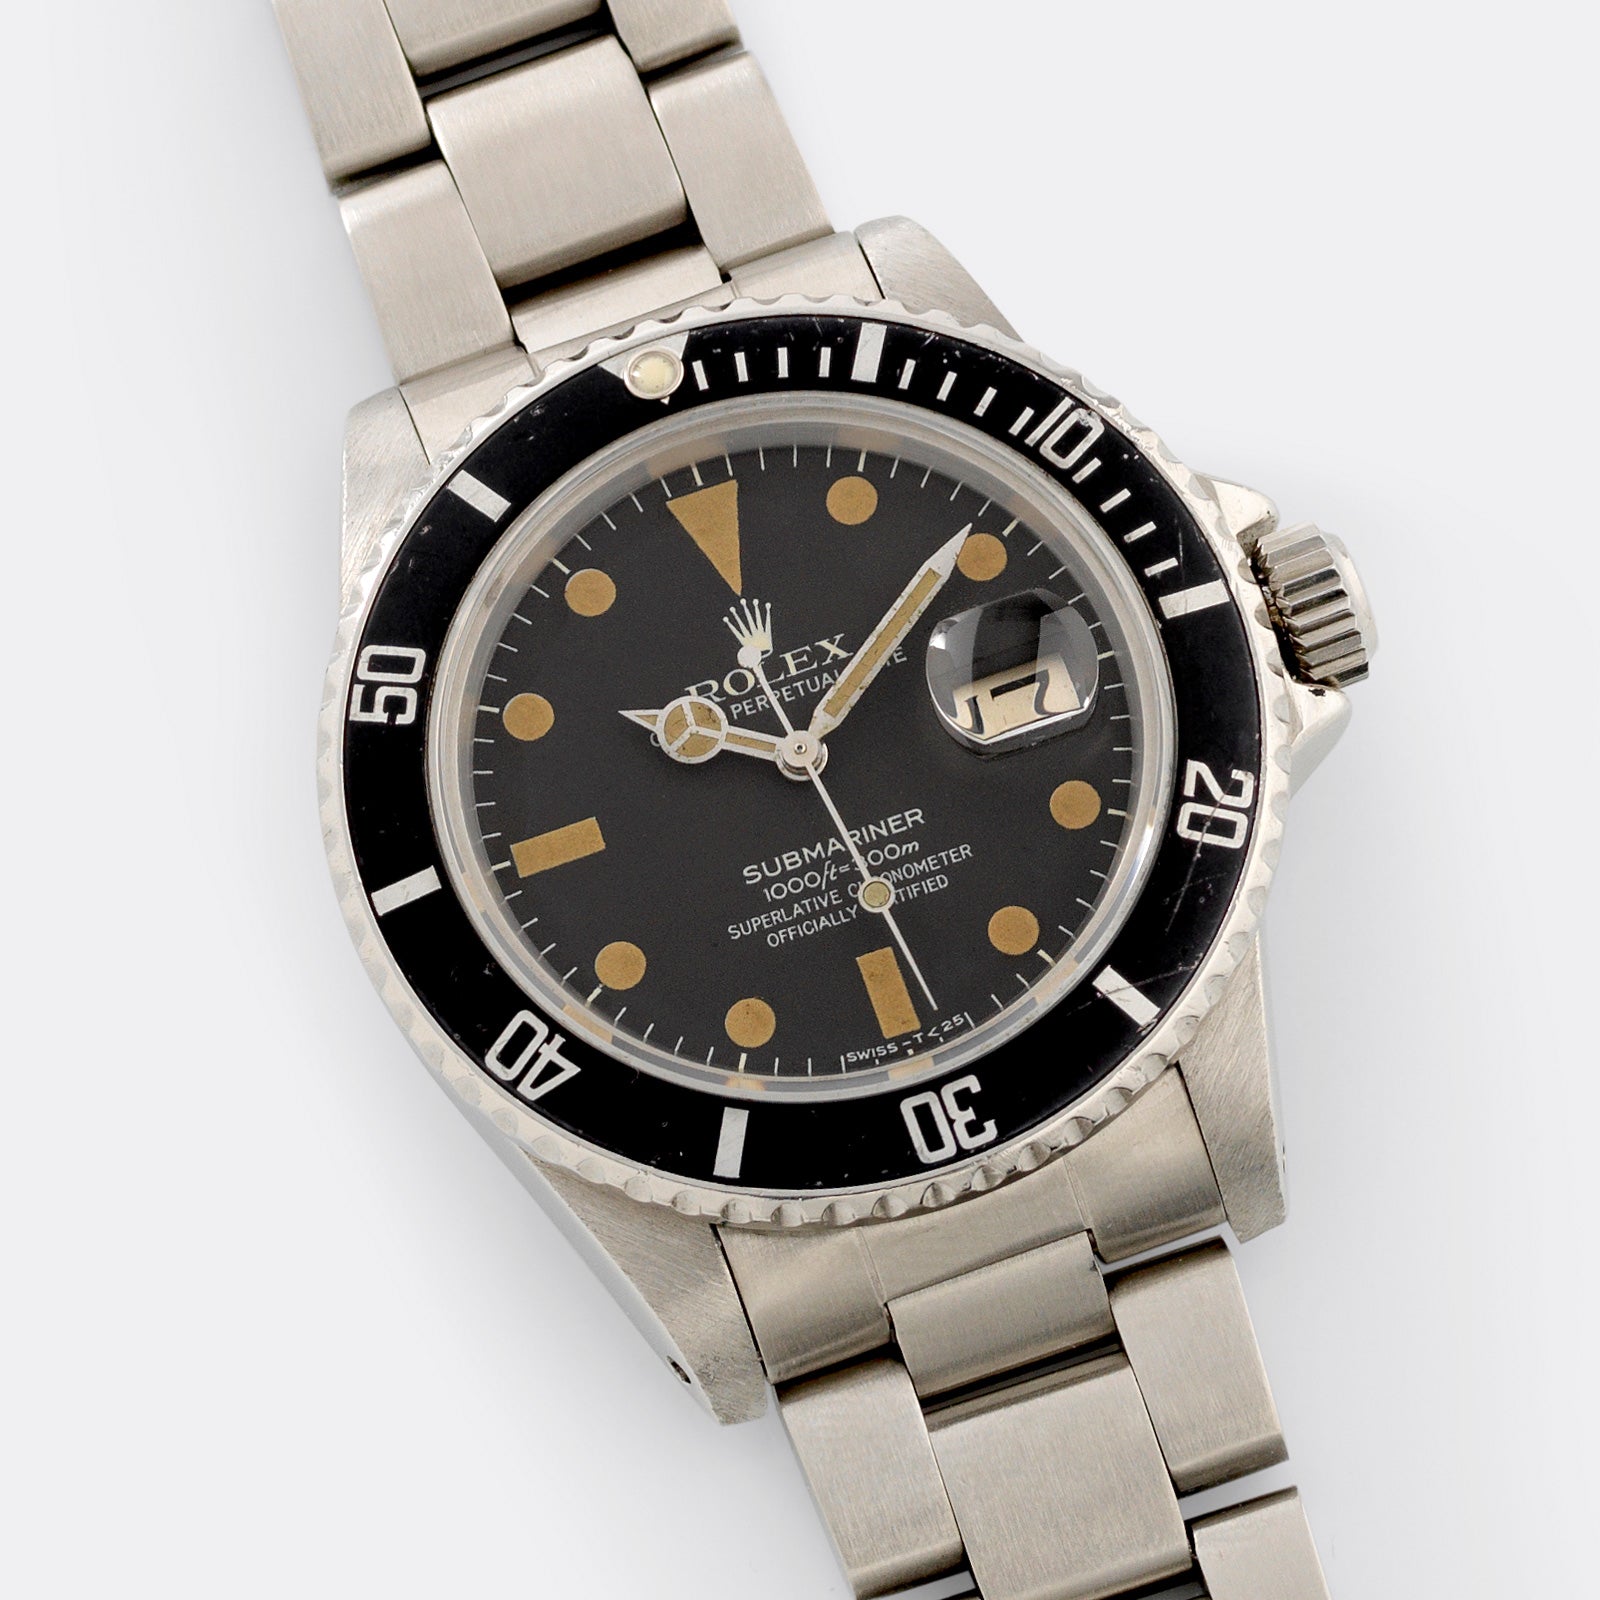 Rolex Submariner Date Matte Dial Reference 16800